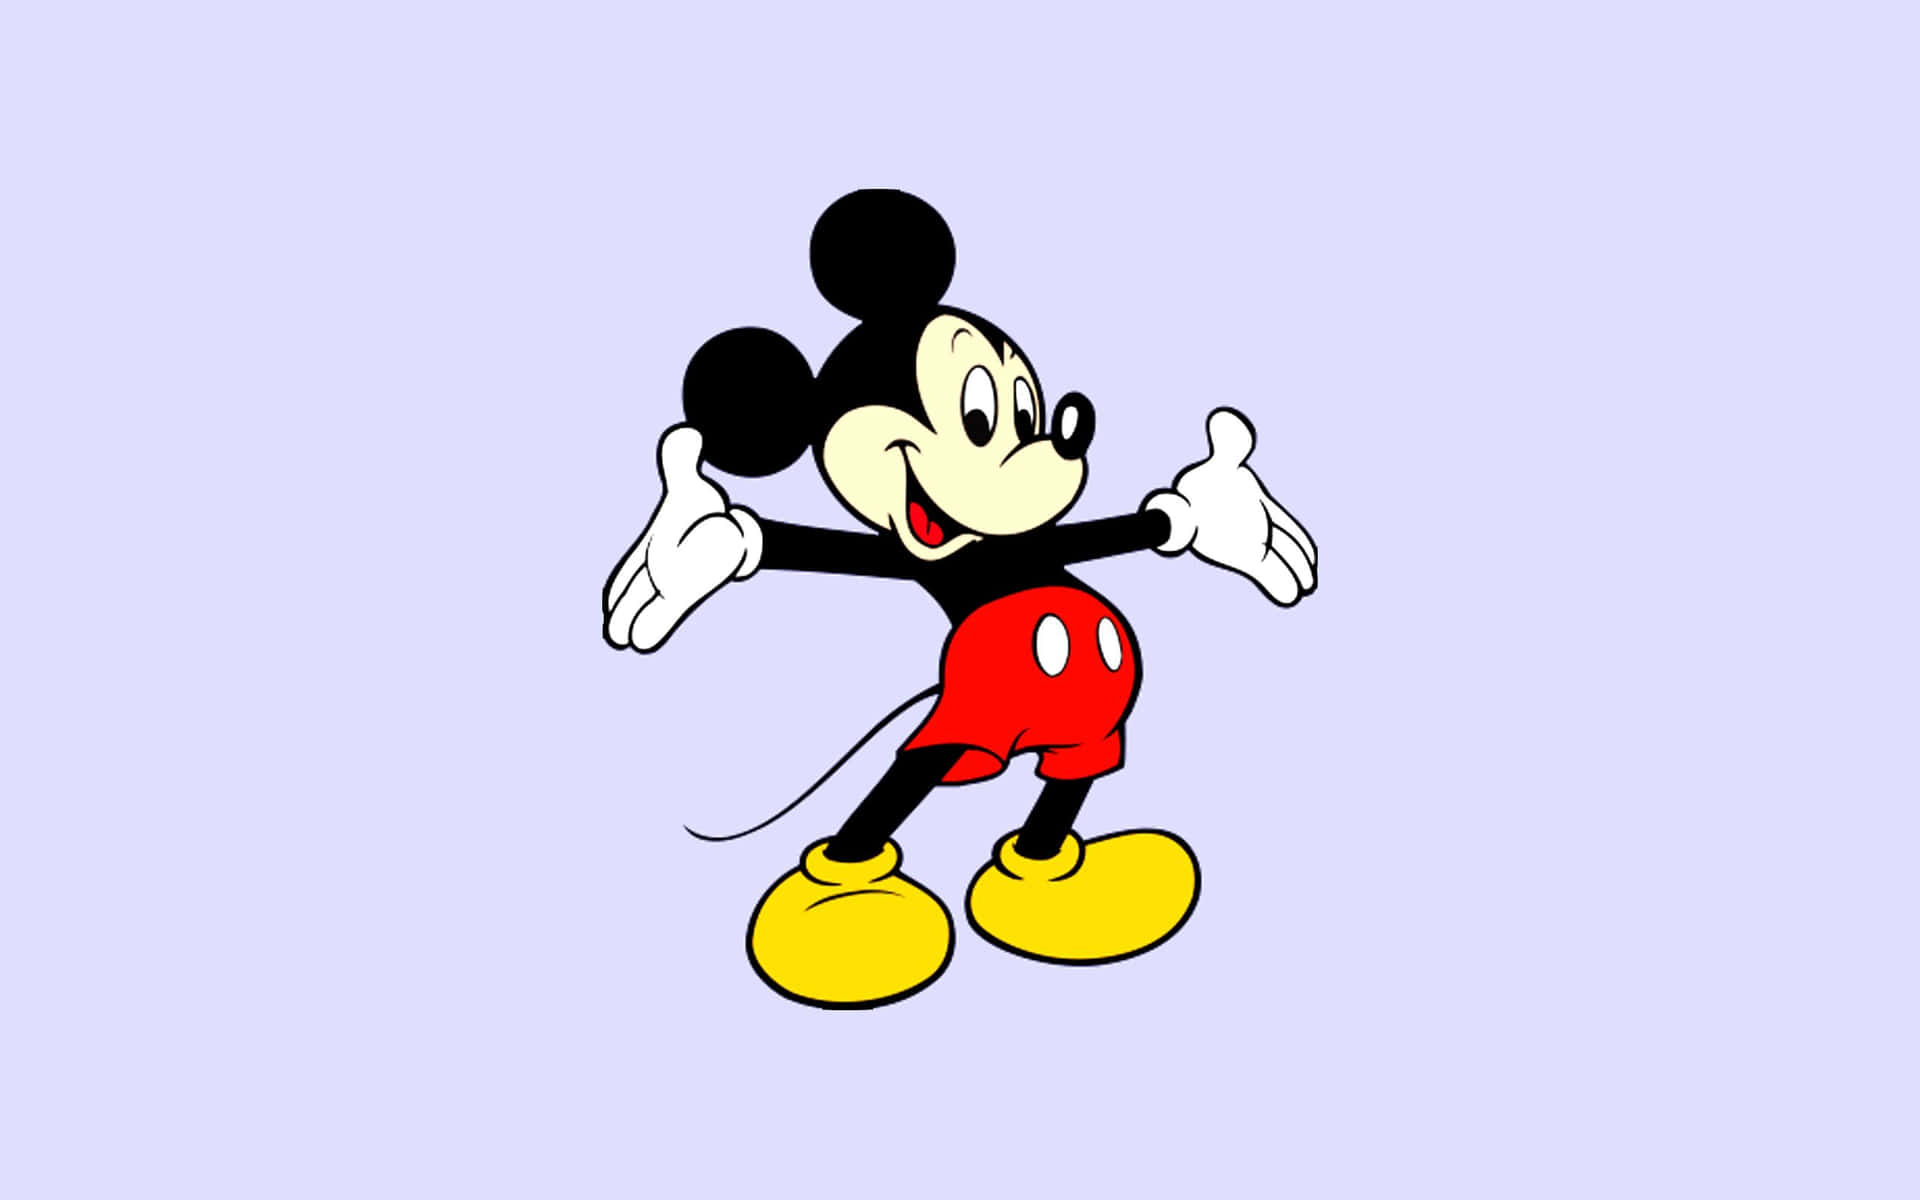 Classic Mickey Mouse joyfully waving with a skip in his step